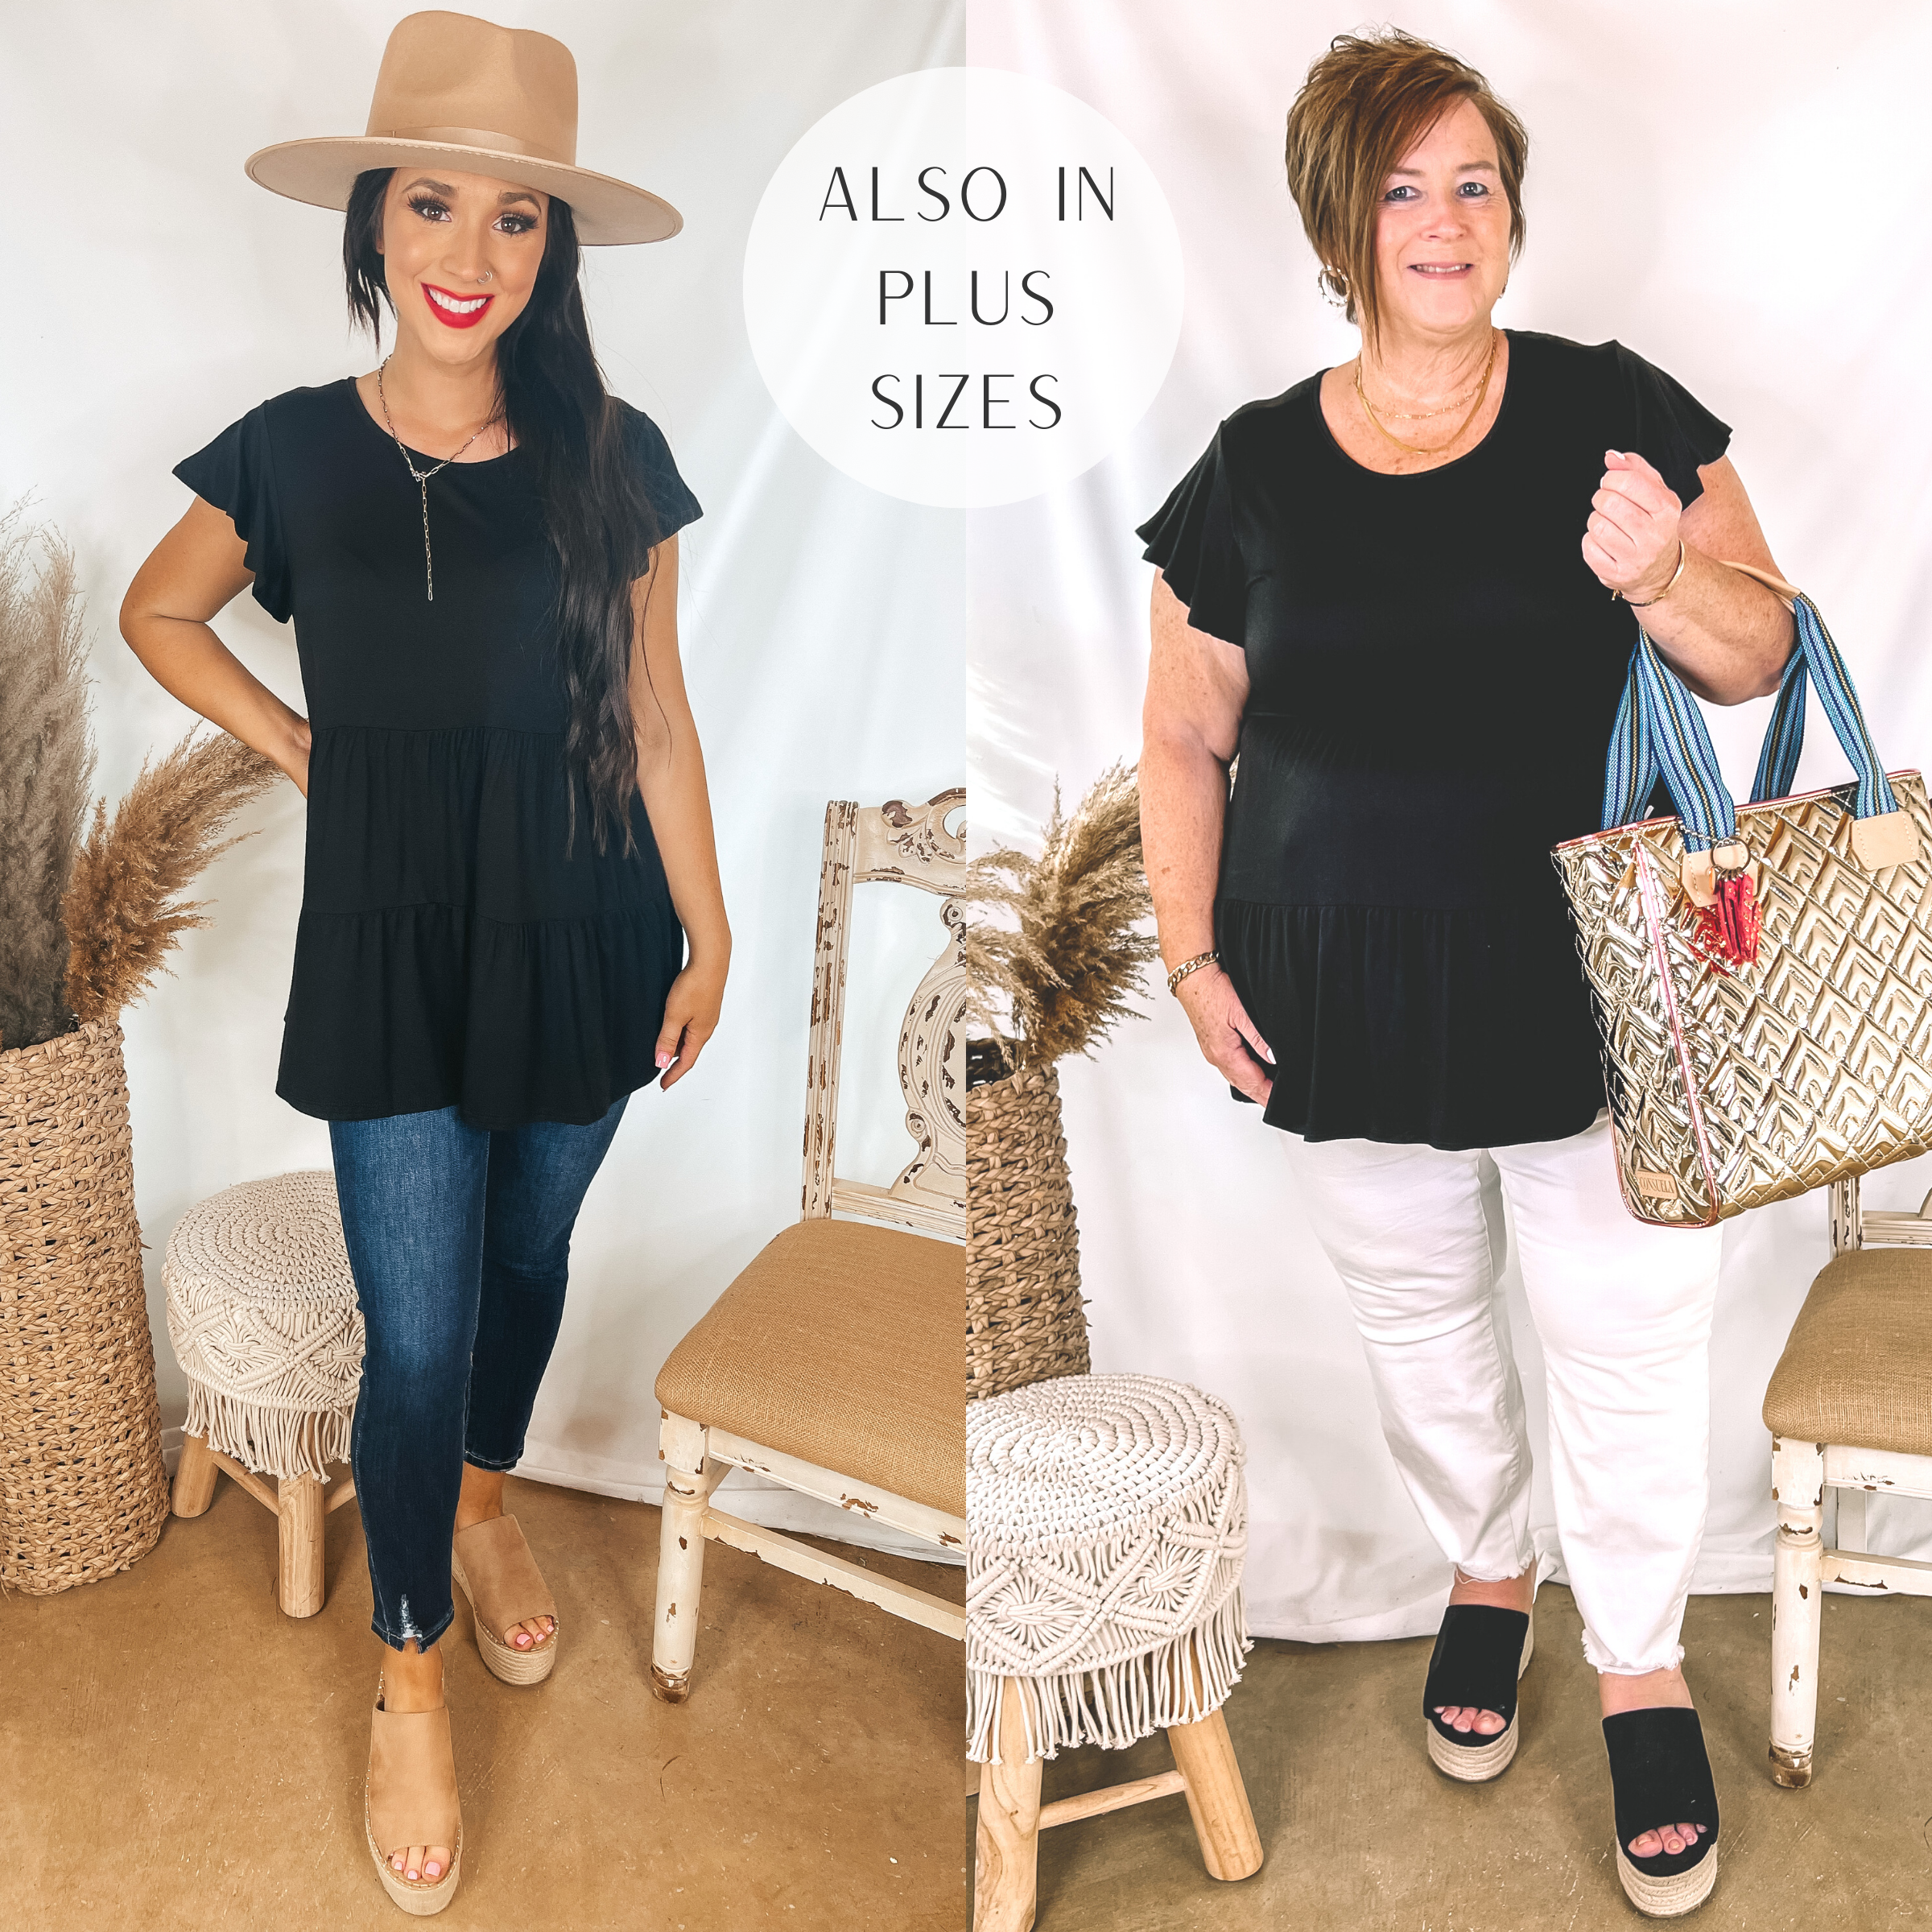 Models are wearing a black tiered top that has ruffle cap sleeves. Size small Model has it paired with dark wash skinny jeans, tan wedges, a tan hat, and silver jewelry. Plus size model has it paired with white jeans, black wedges, and gold jewelry.